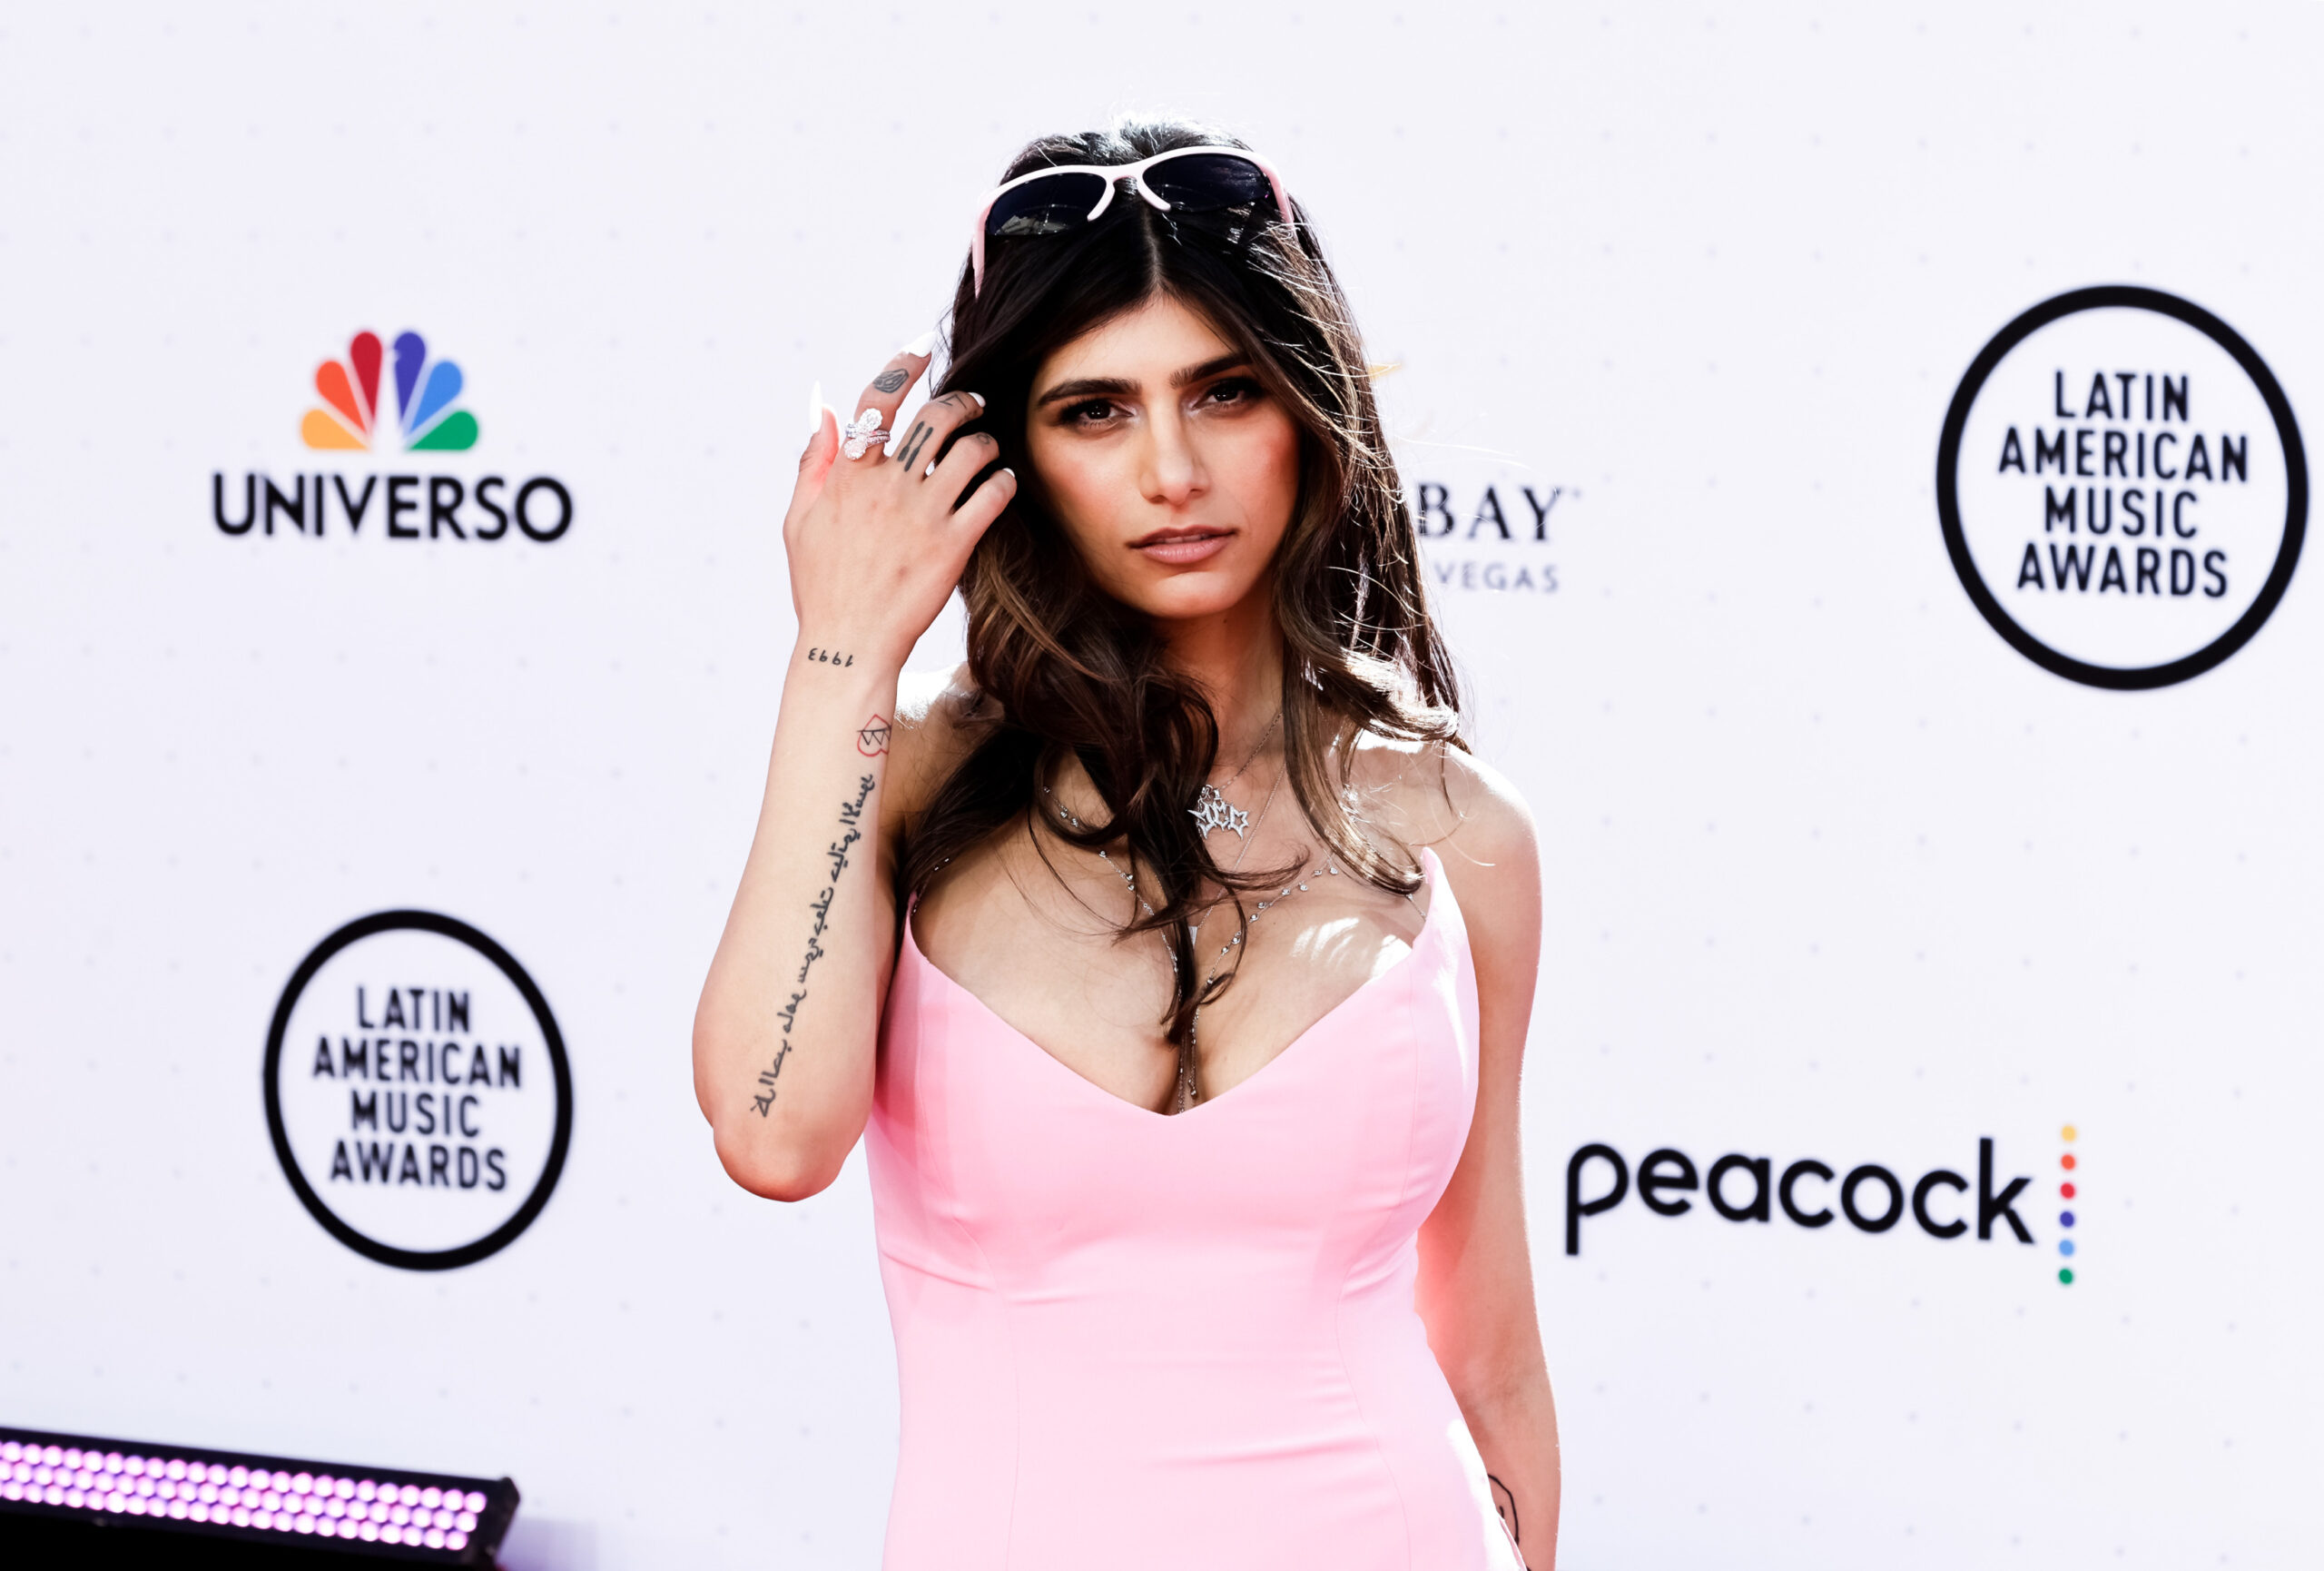 Khalifa Sex Basketball - Mia Khalifa Let Go From Playboy After Voicing Support For Palestine